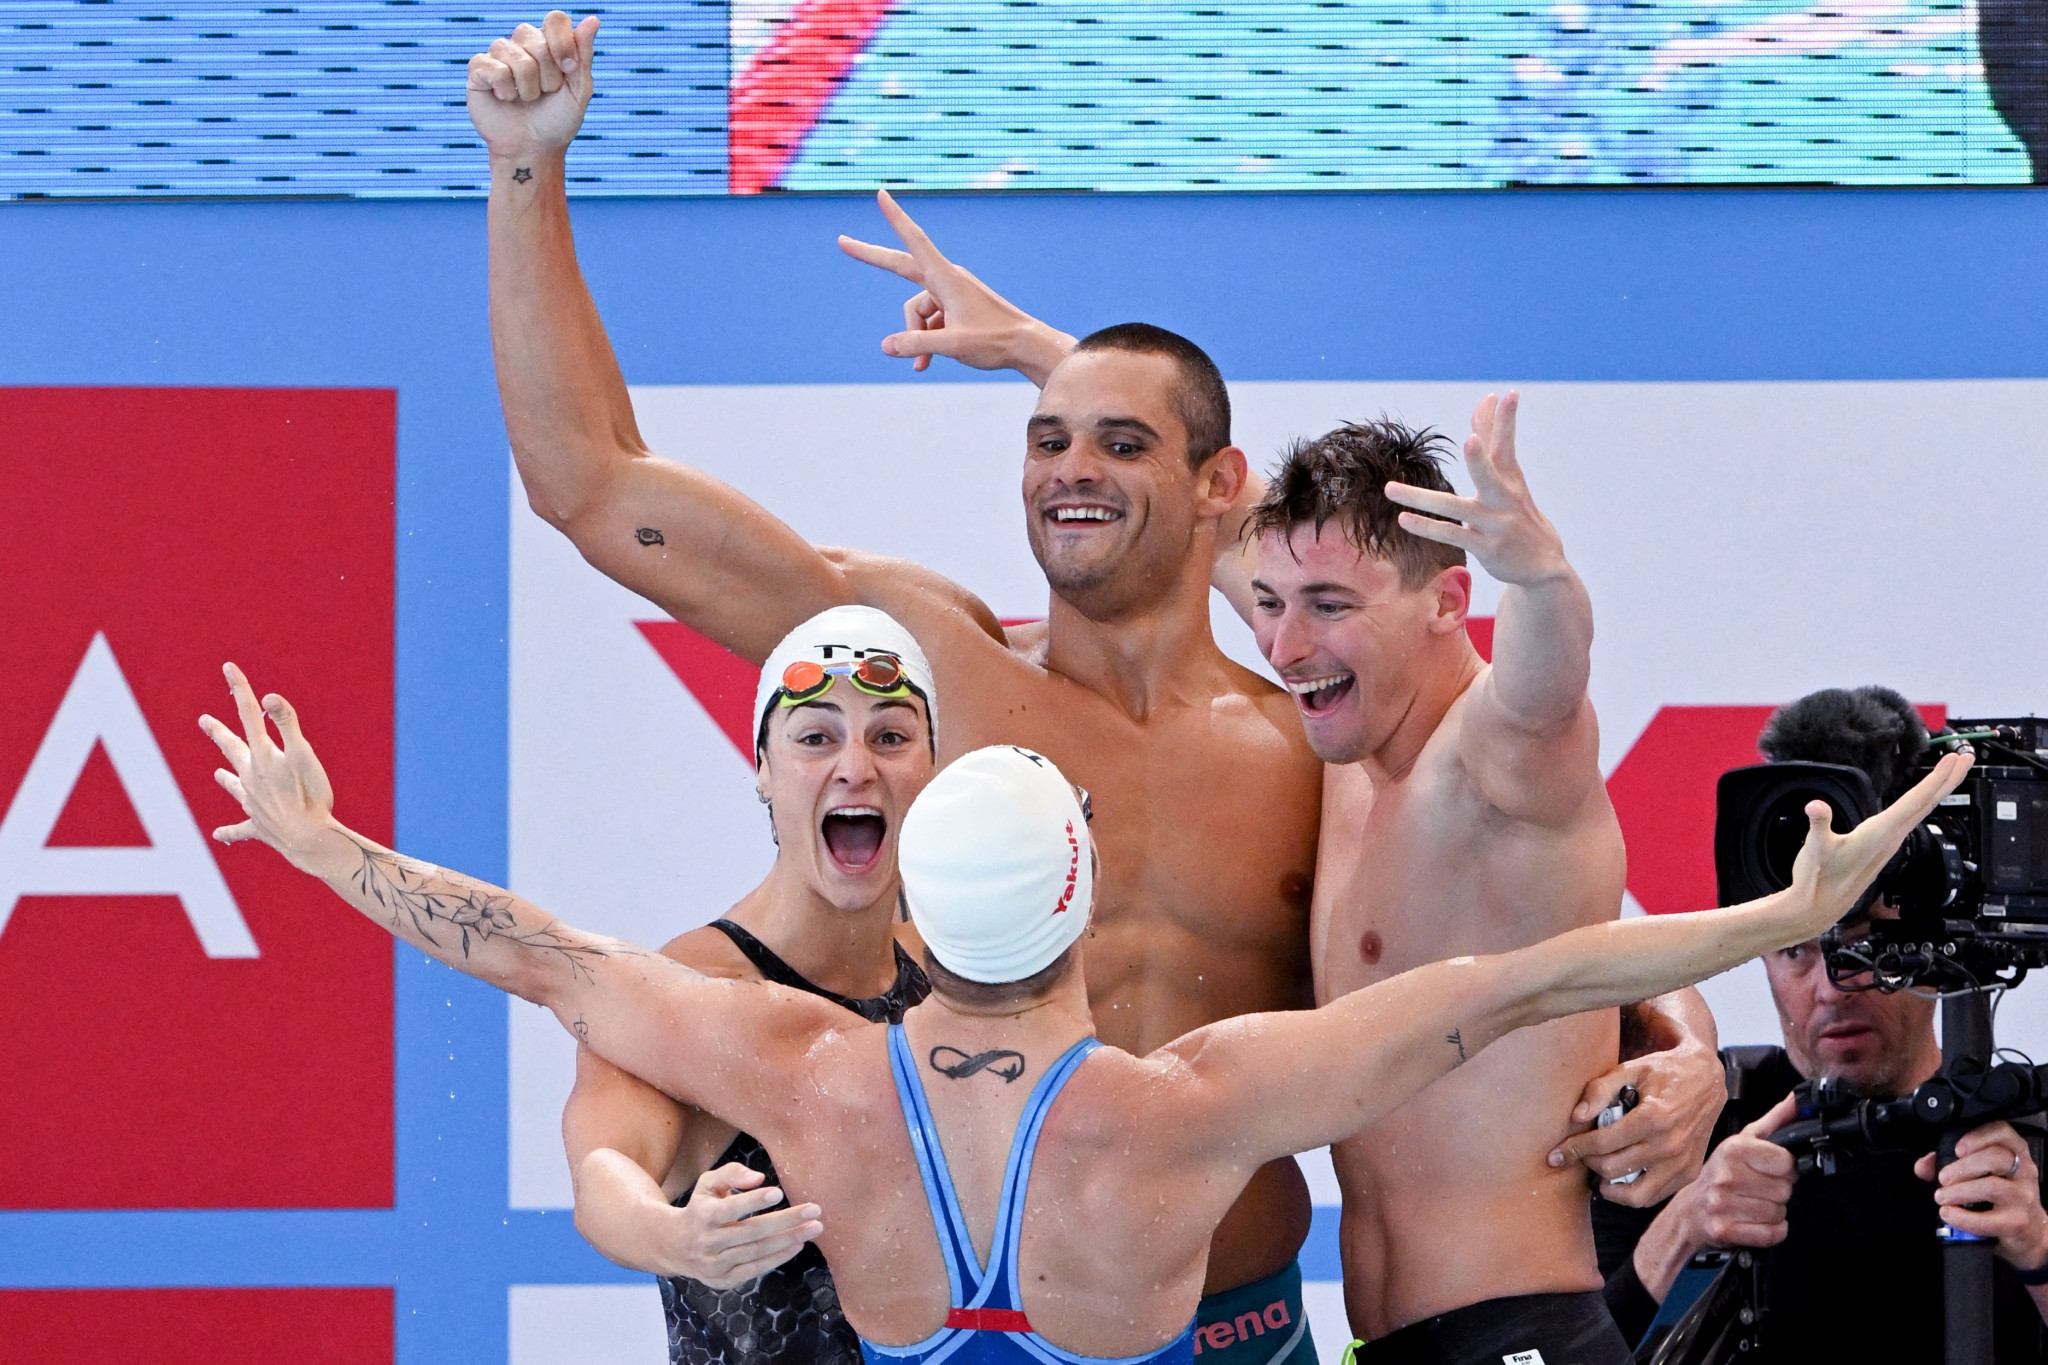 The French team are overjoyed after winning the mixed 4x50m freestyle relay crown ©Getty Images